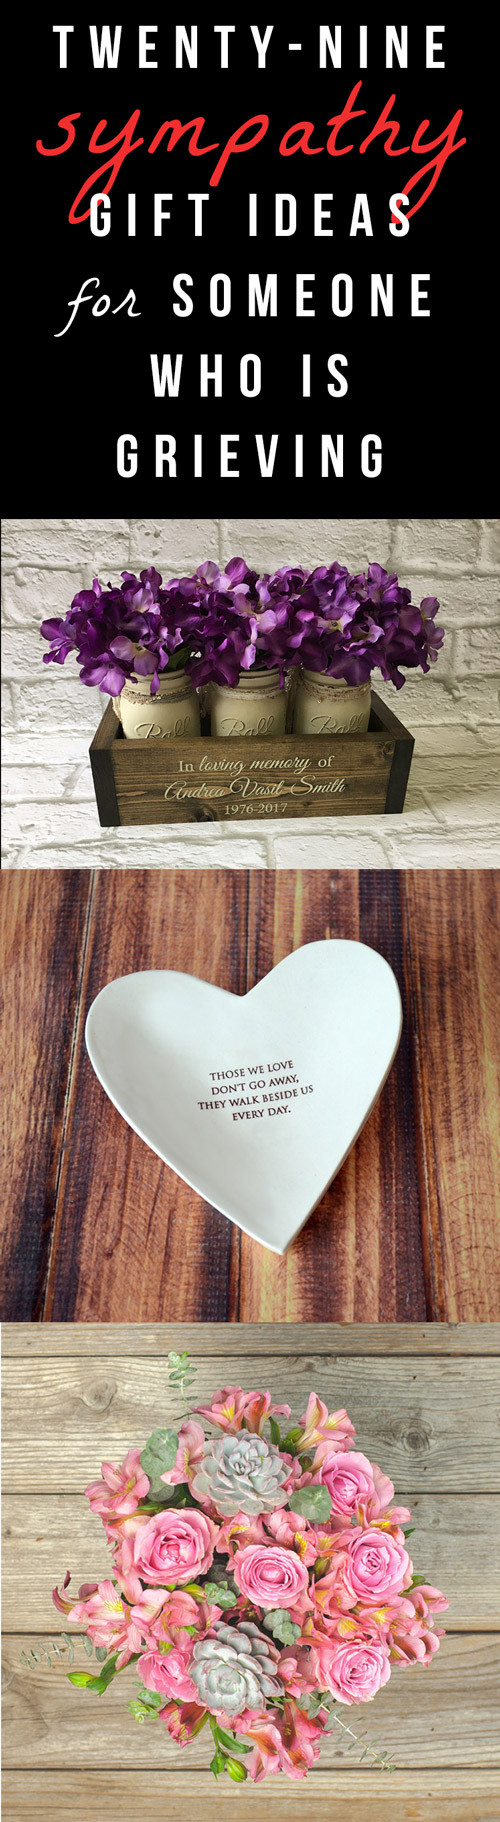 Gift Ideas For Grieving Mothers
 29 Sympathy Gifts for Someone Who Is Grieving Urns